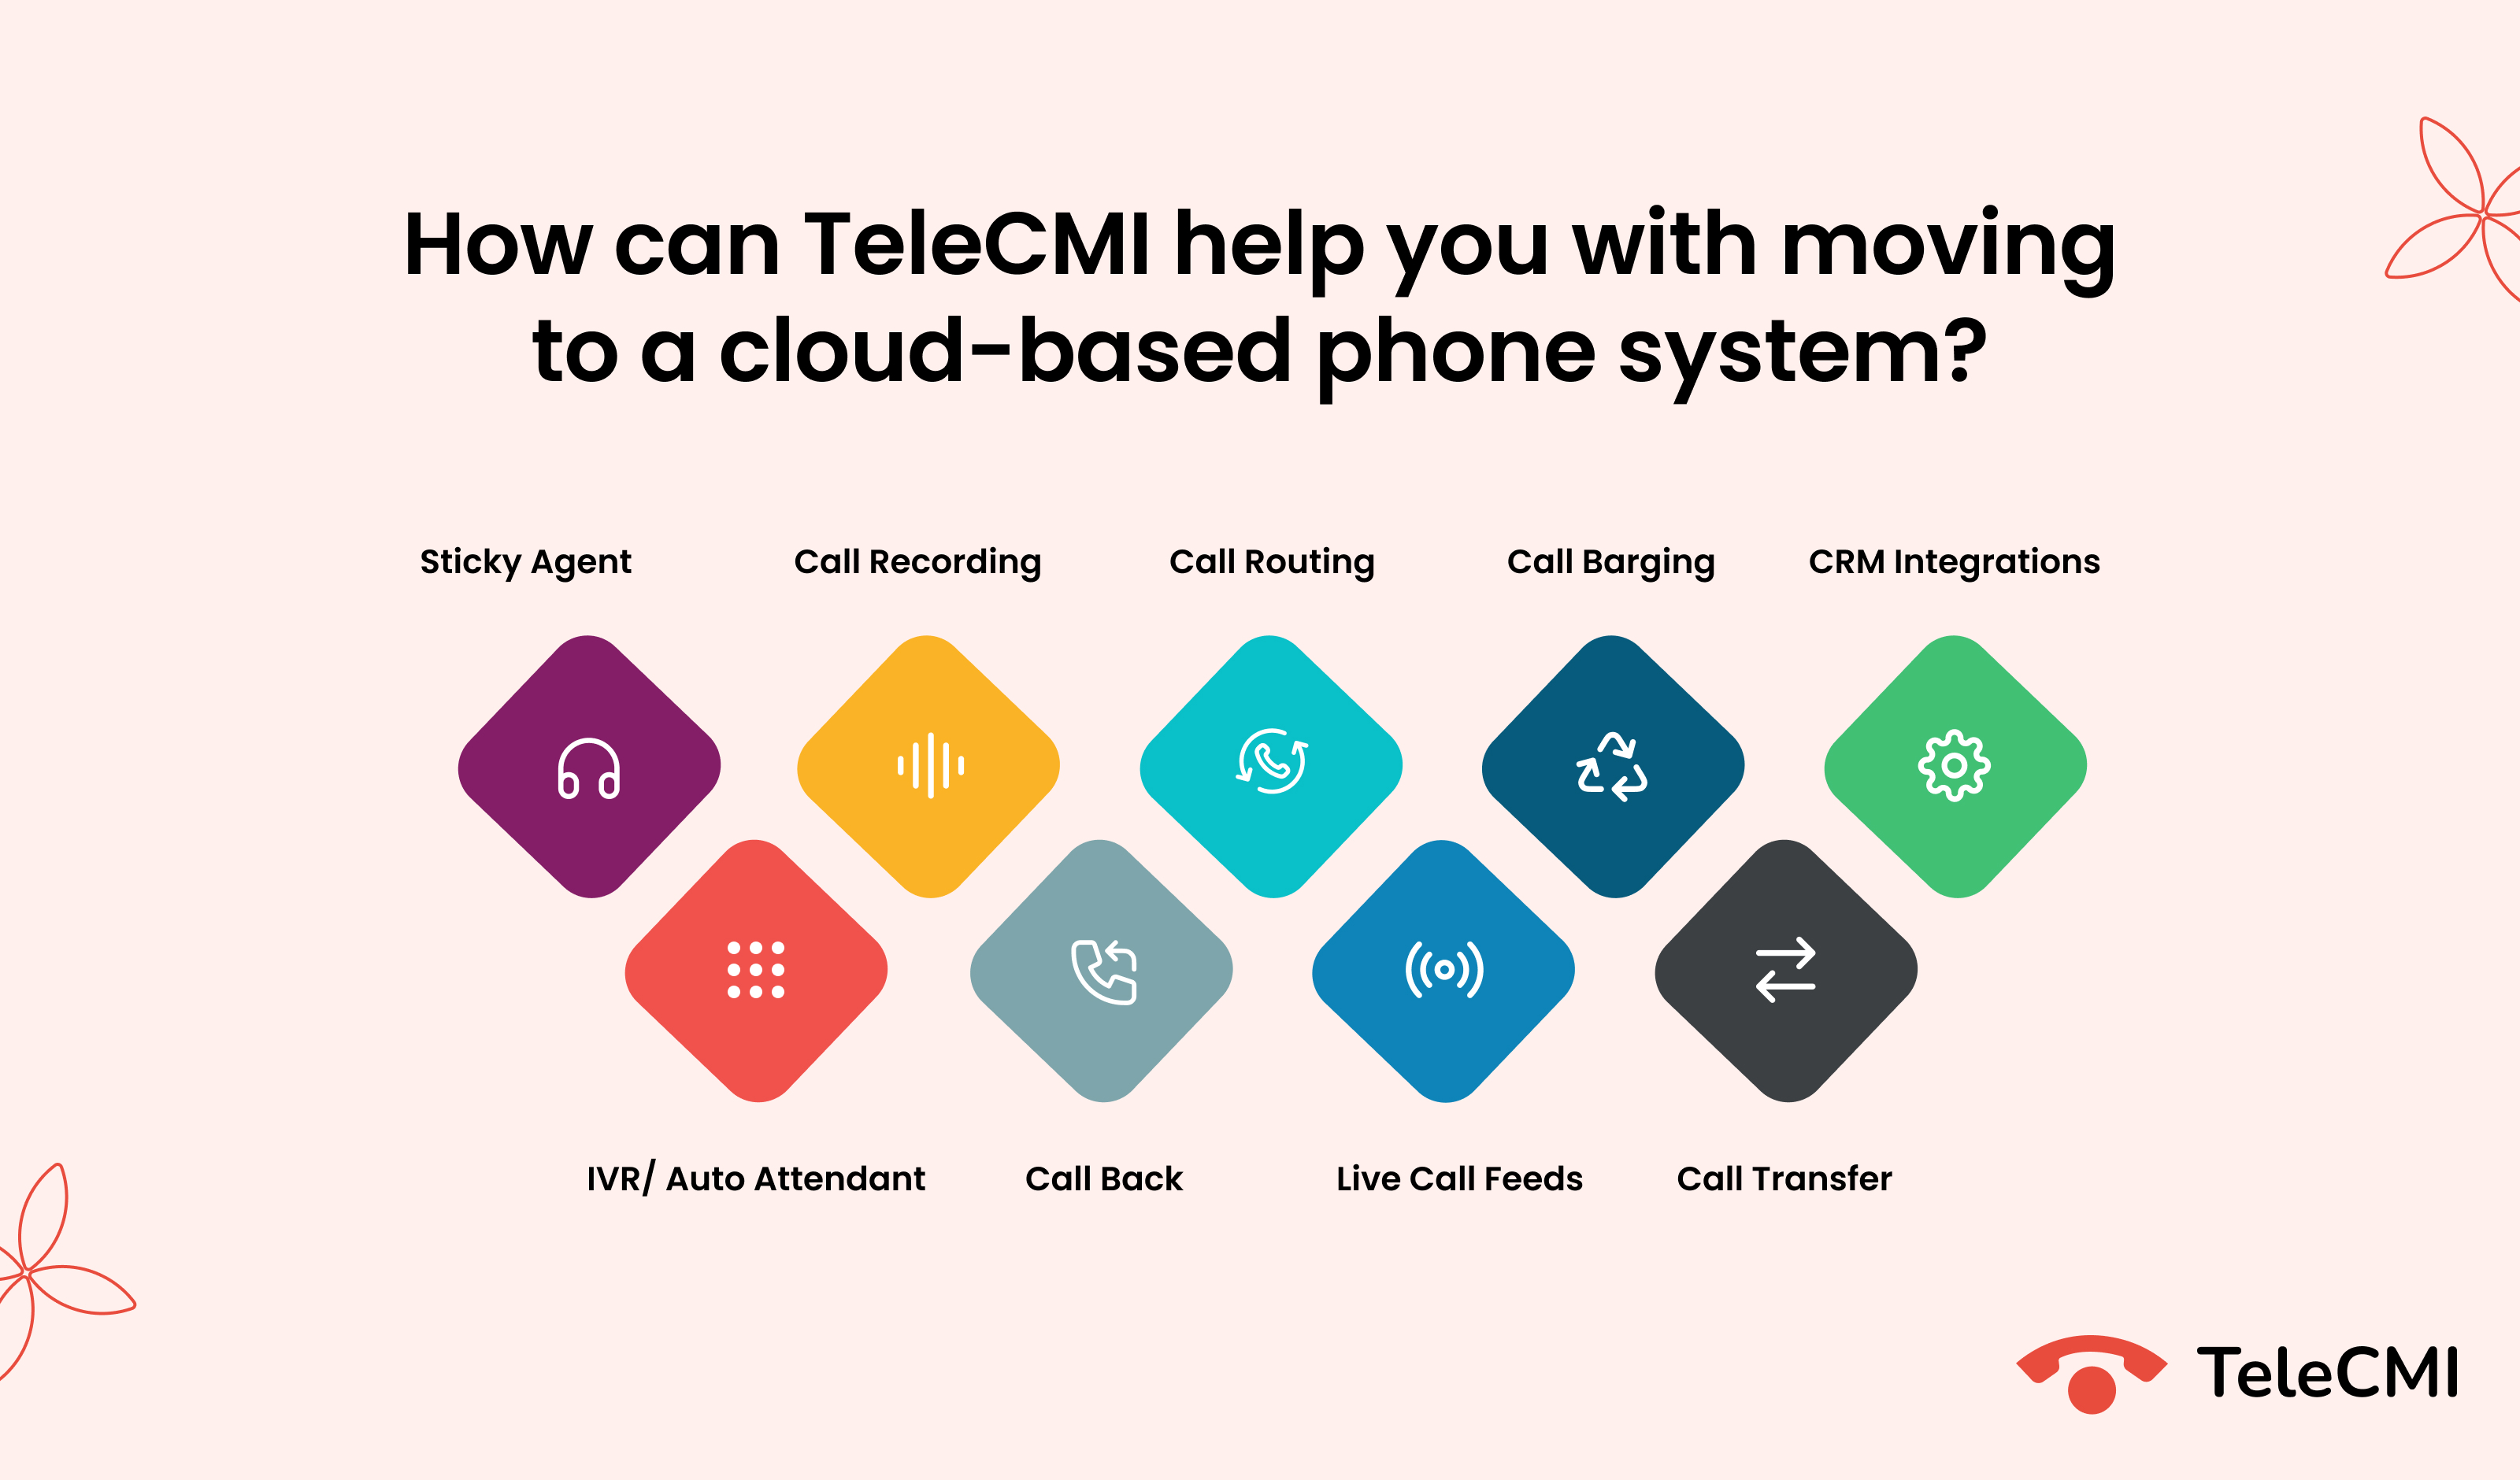 Explore our highlighted features of the TeleCMI application?